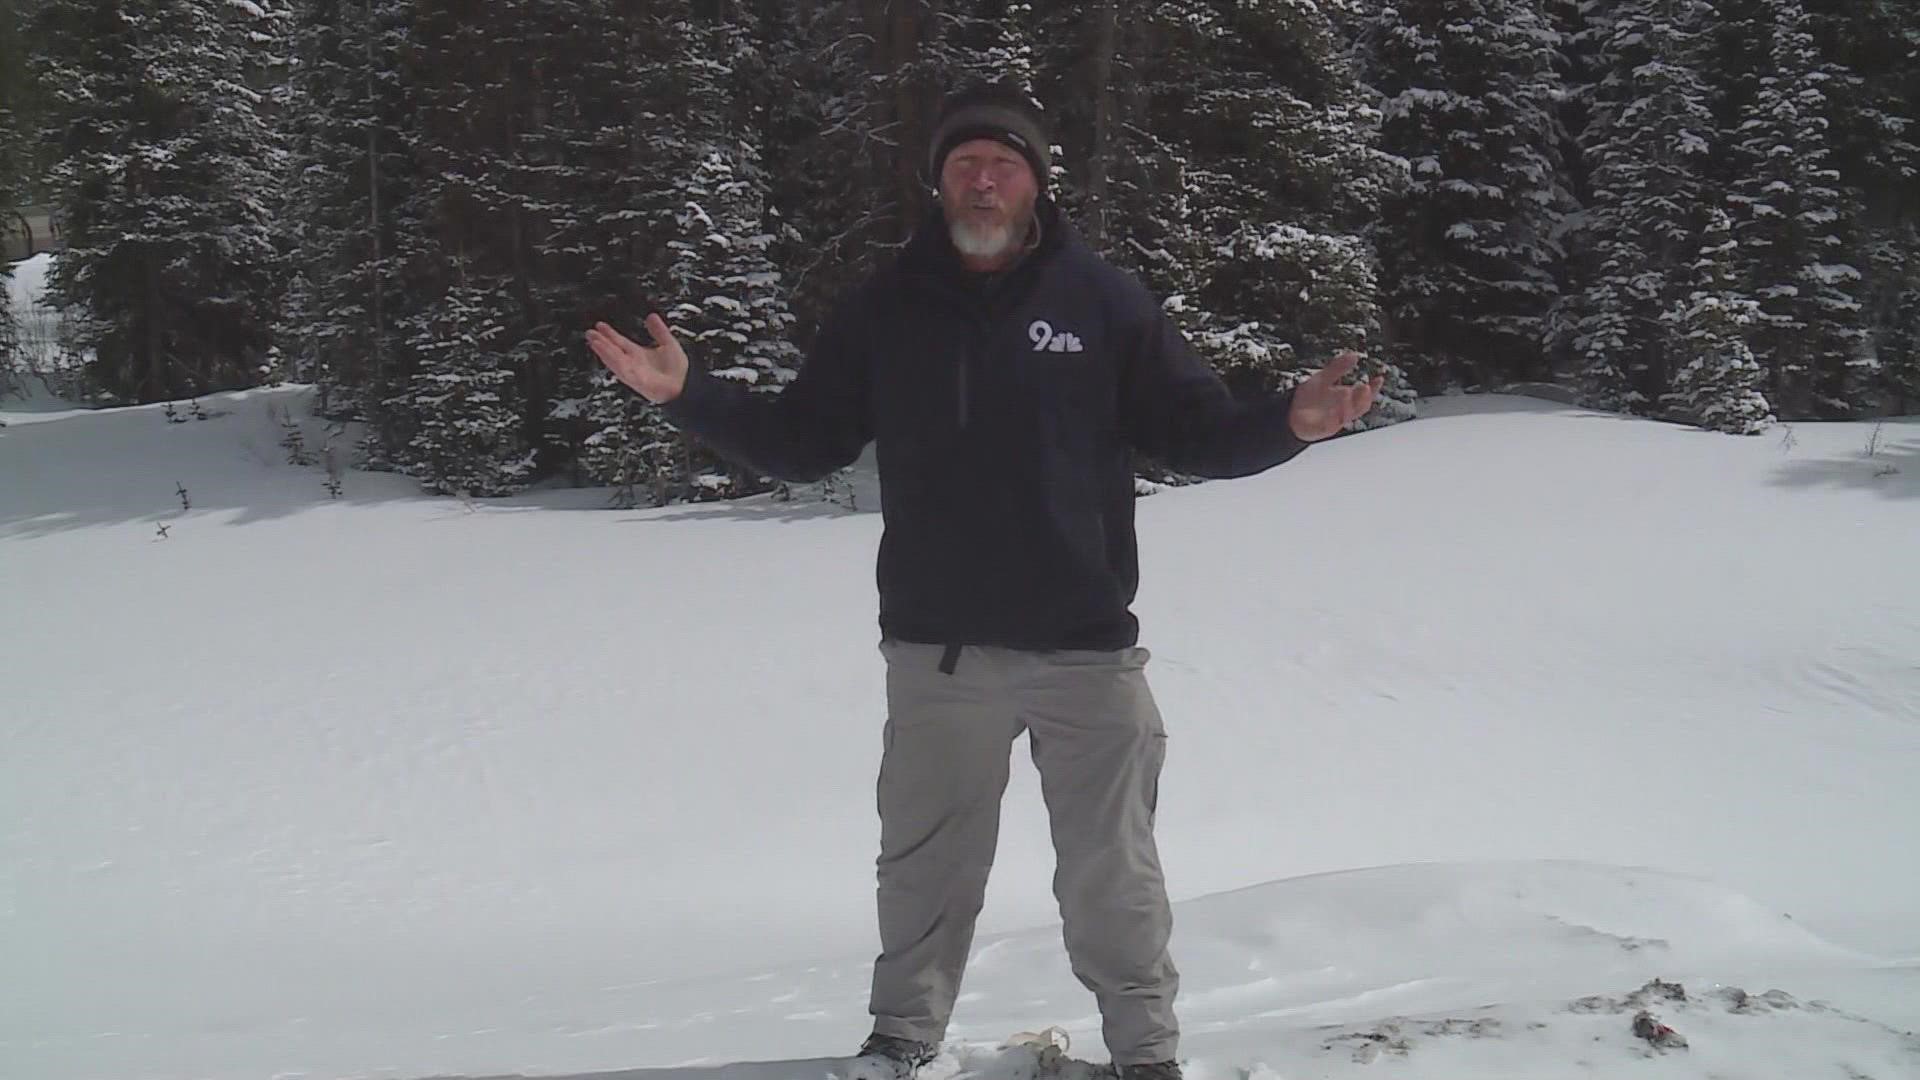 Meteorologist Cory Reppenhagen details how snowpack data can be used to project drought conditions and wildfire danger.